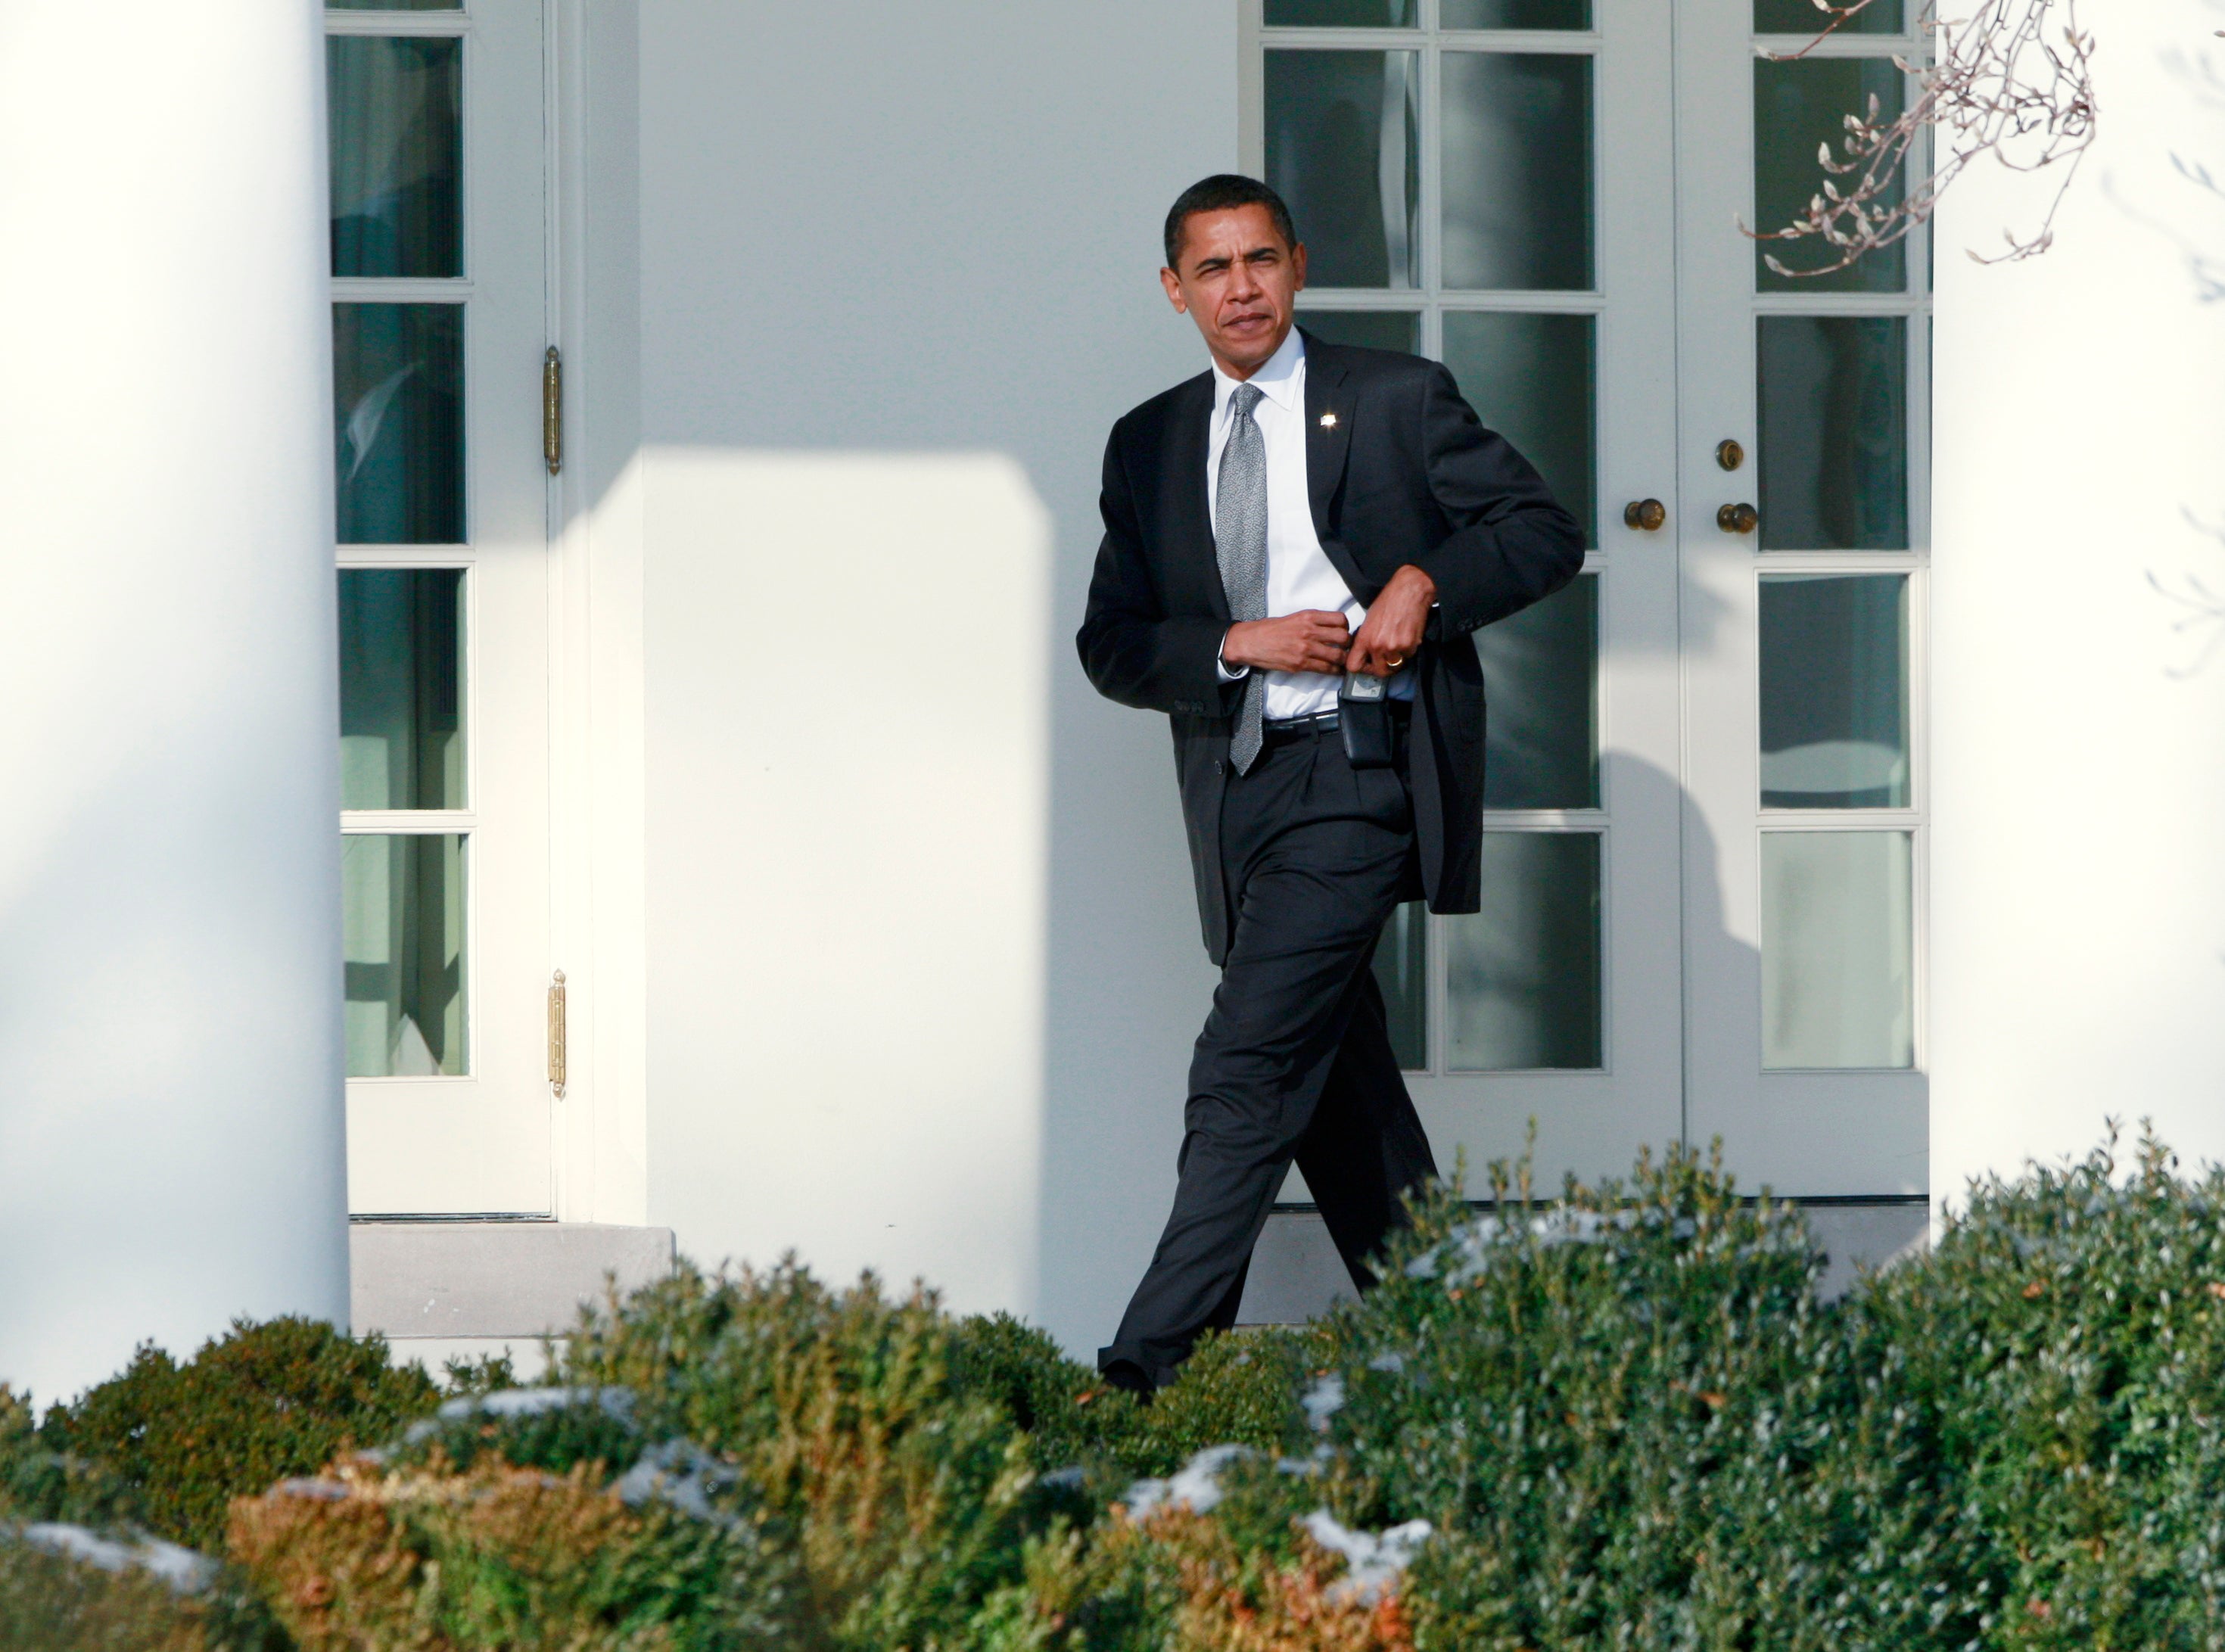 U.S. President Barack Obama places a Blackberry device back in the holster as he makes his way toward the Oval Office at the White House in Washington, January 29, 2009. Obama